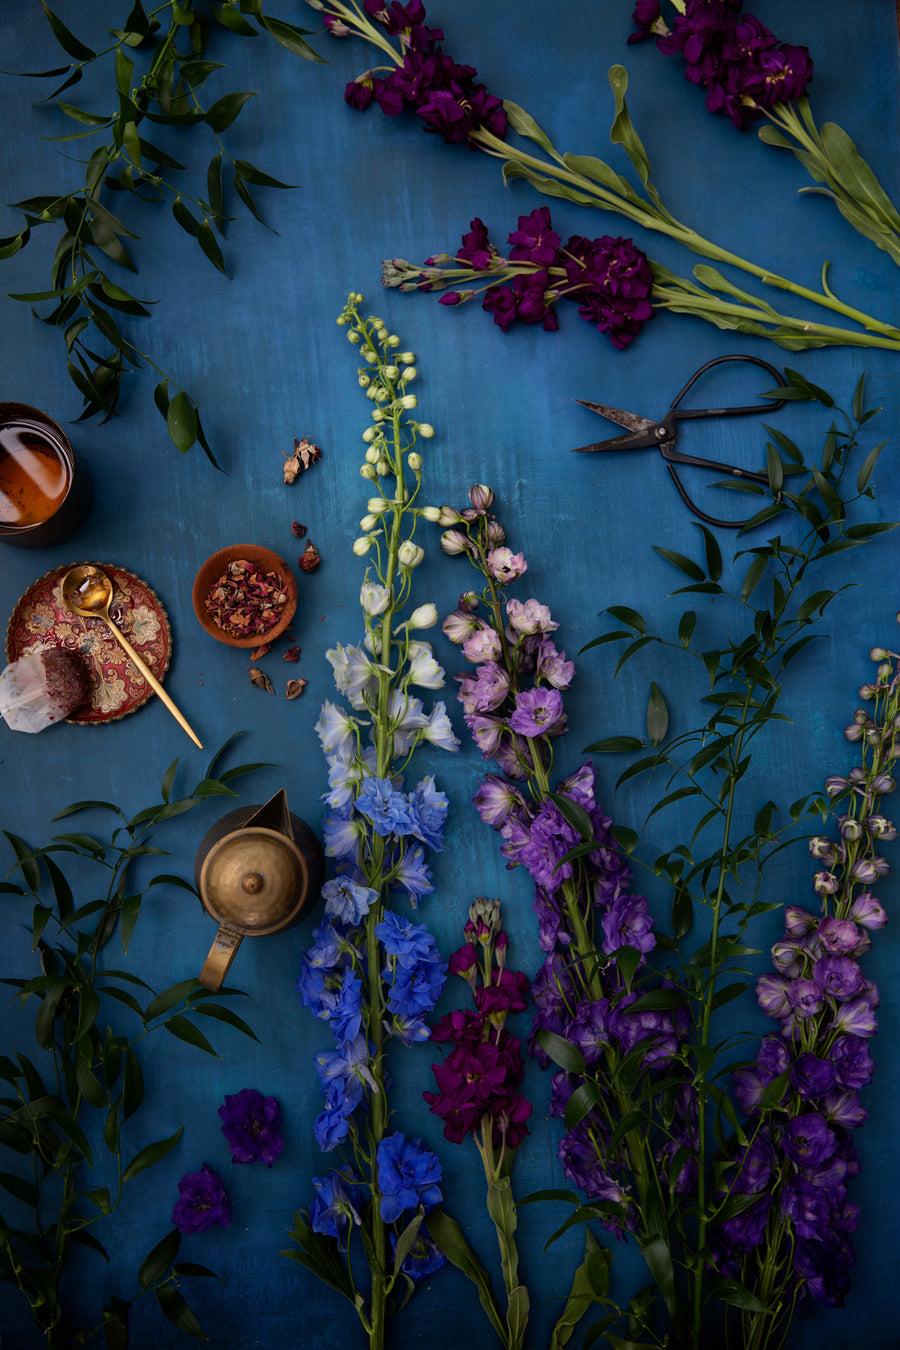 Dark & moody blue photography surface with flowers